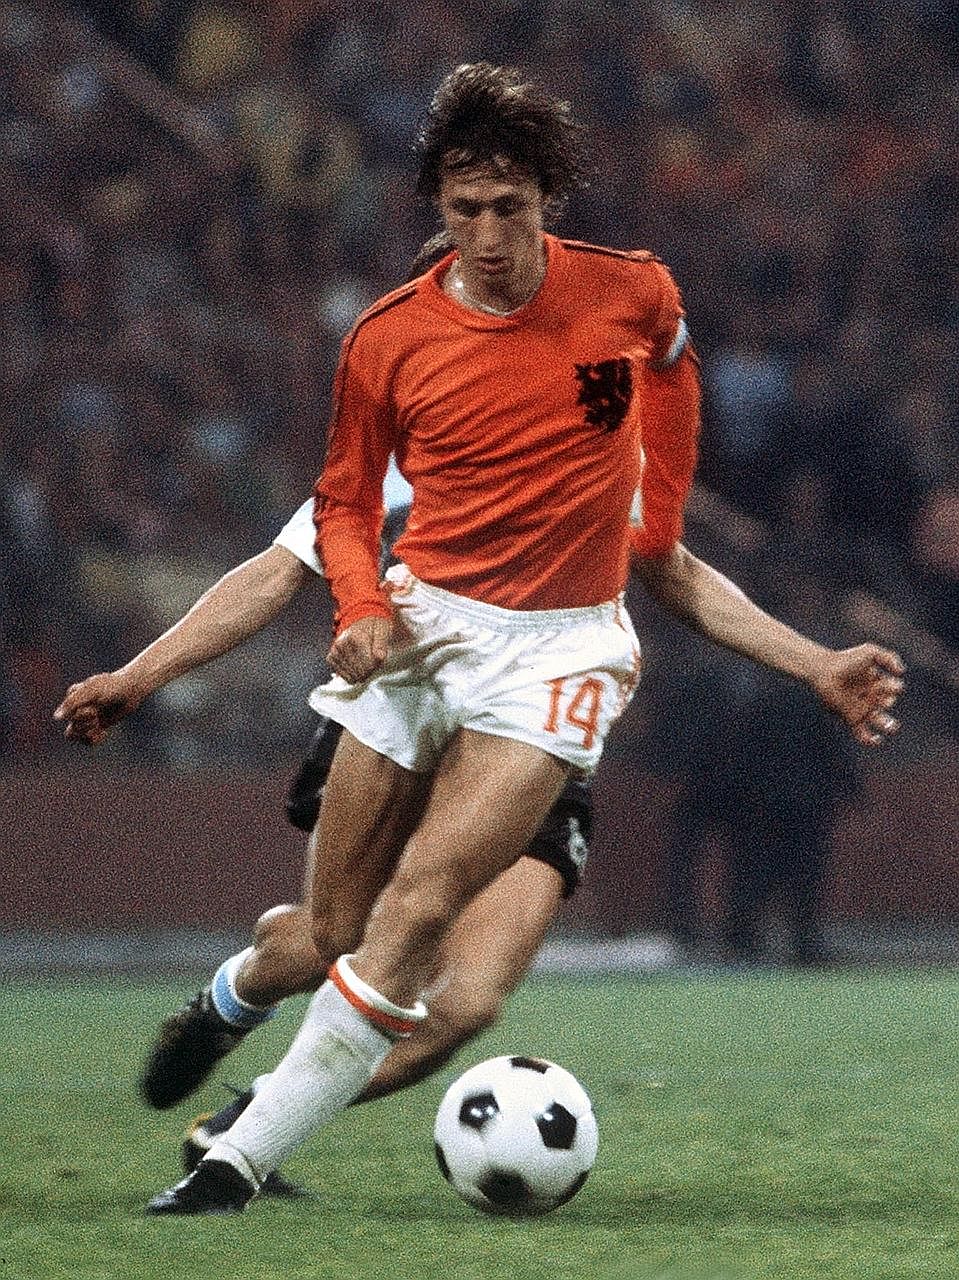 A 1974 photo showing the late Dutch forward Johan Cruyff controlling the ball under pressure from a West German player during the World Cup final in Munich which was won by the host nation.